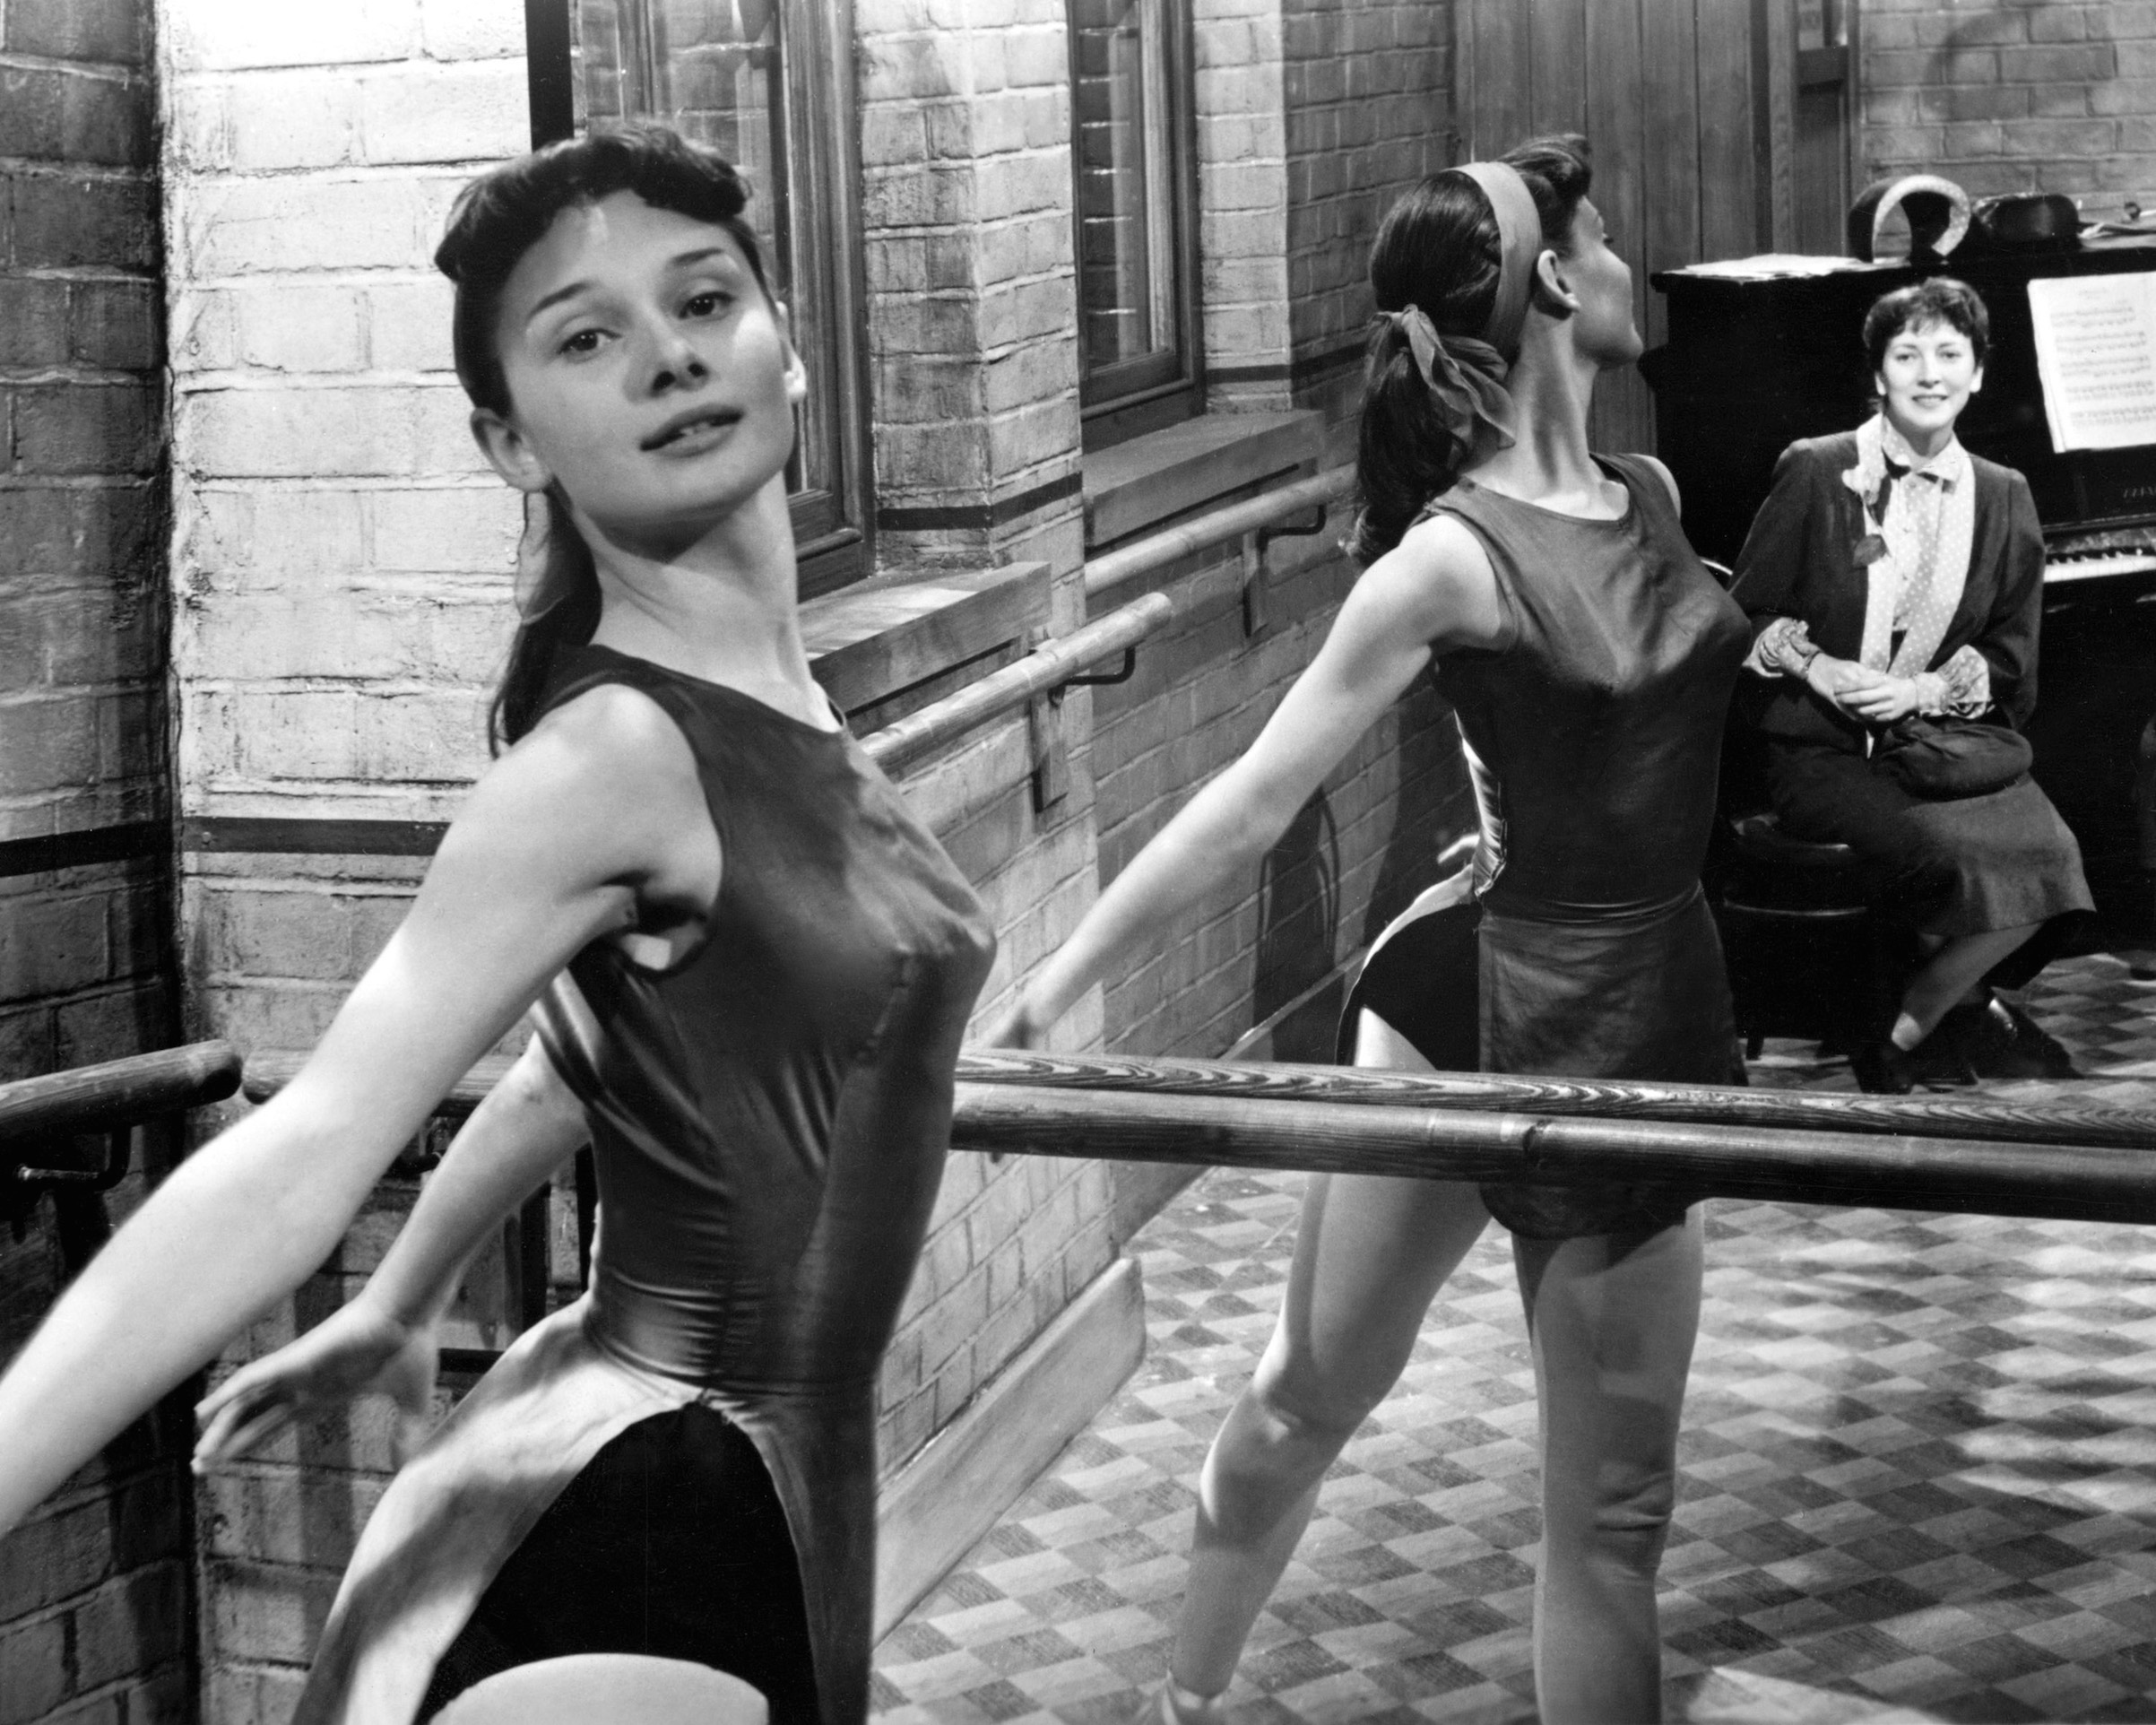 Actor and dancer Audrey Hepburn rehearsing at the barre, circa 1950. (Silver Screen Collection/Getty Images)